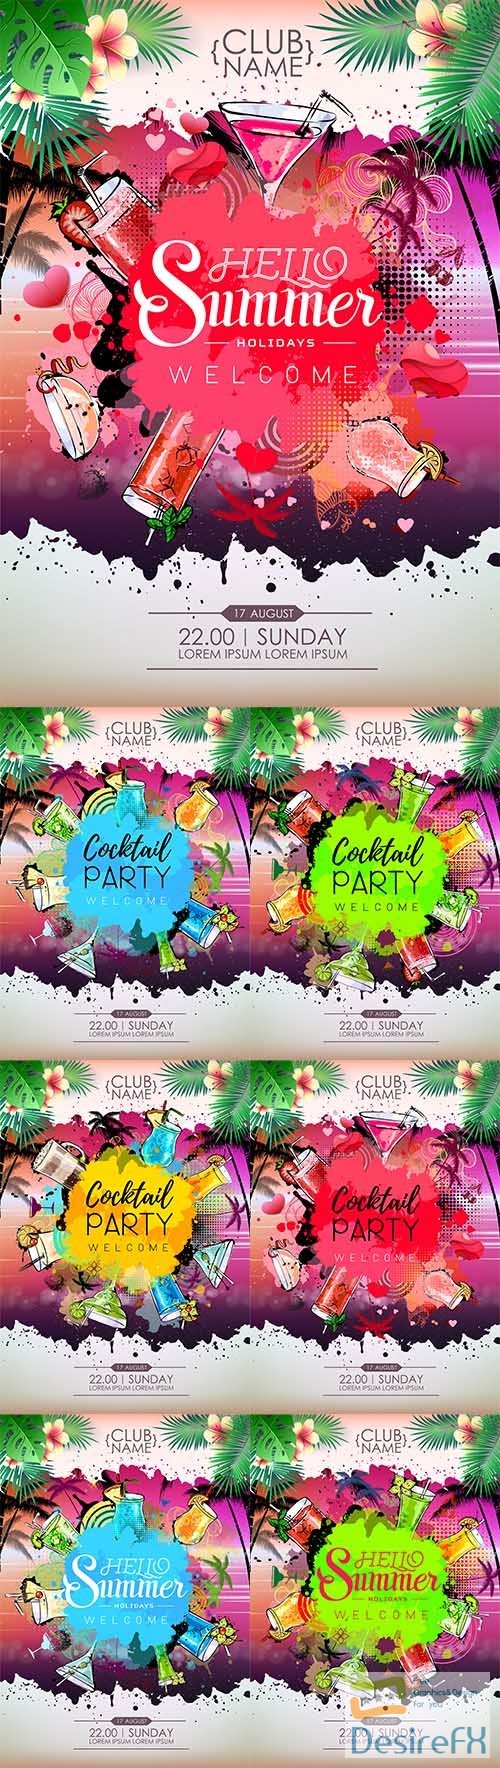 Vector Summer Cocktail party posters design. Cocktail menu